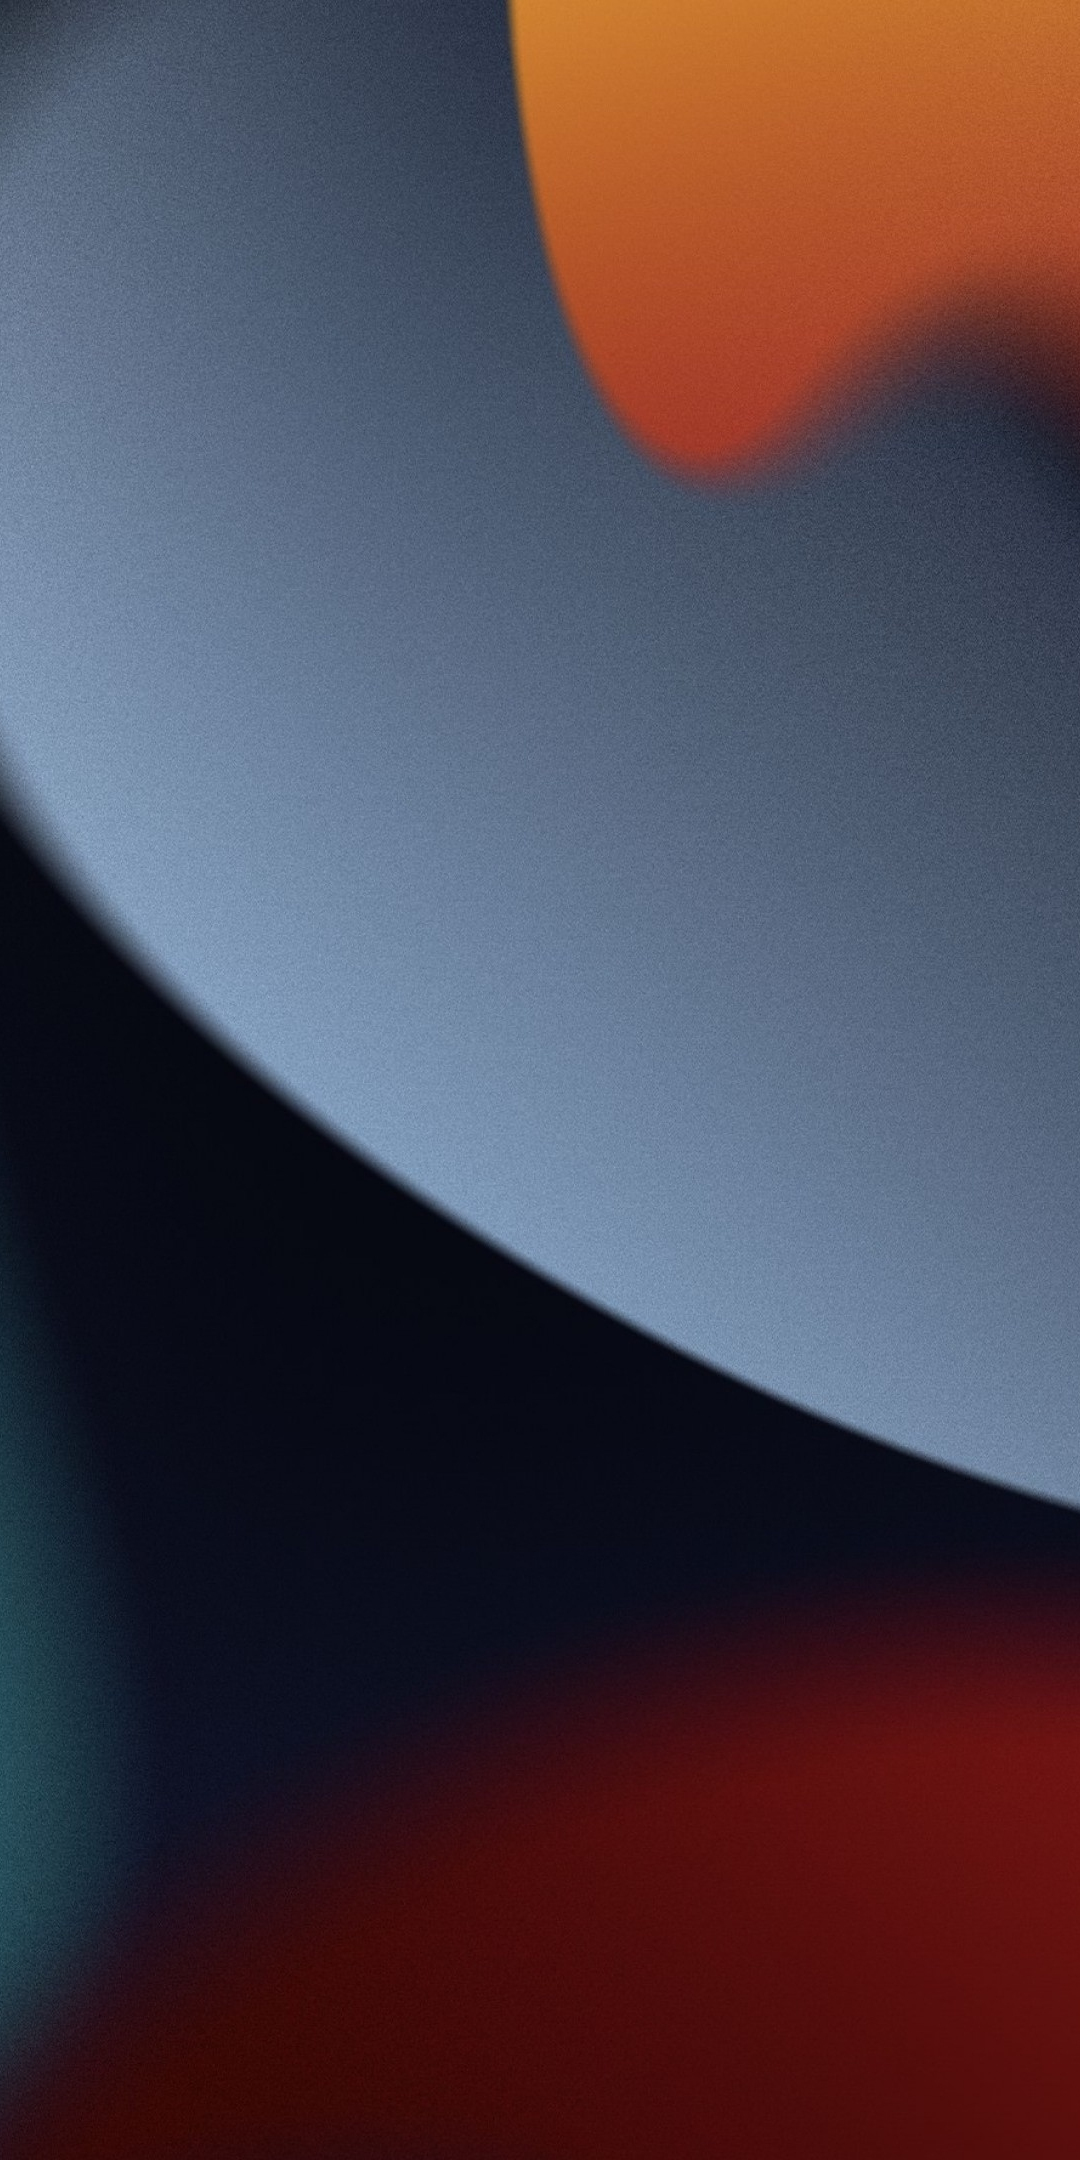 iOS 15, blur shapes, abstraction, 1080x2160 wallpaper